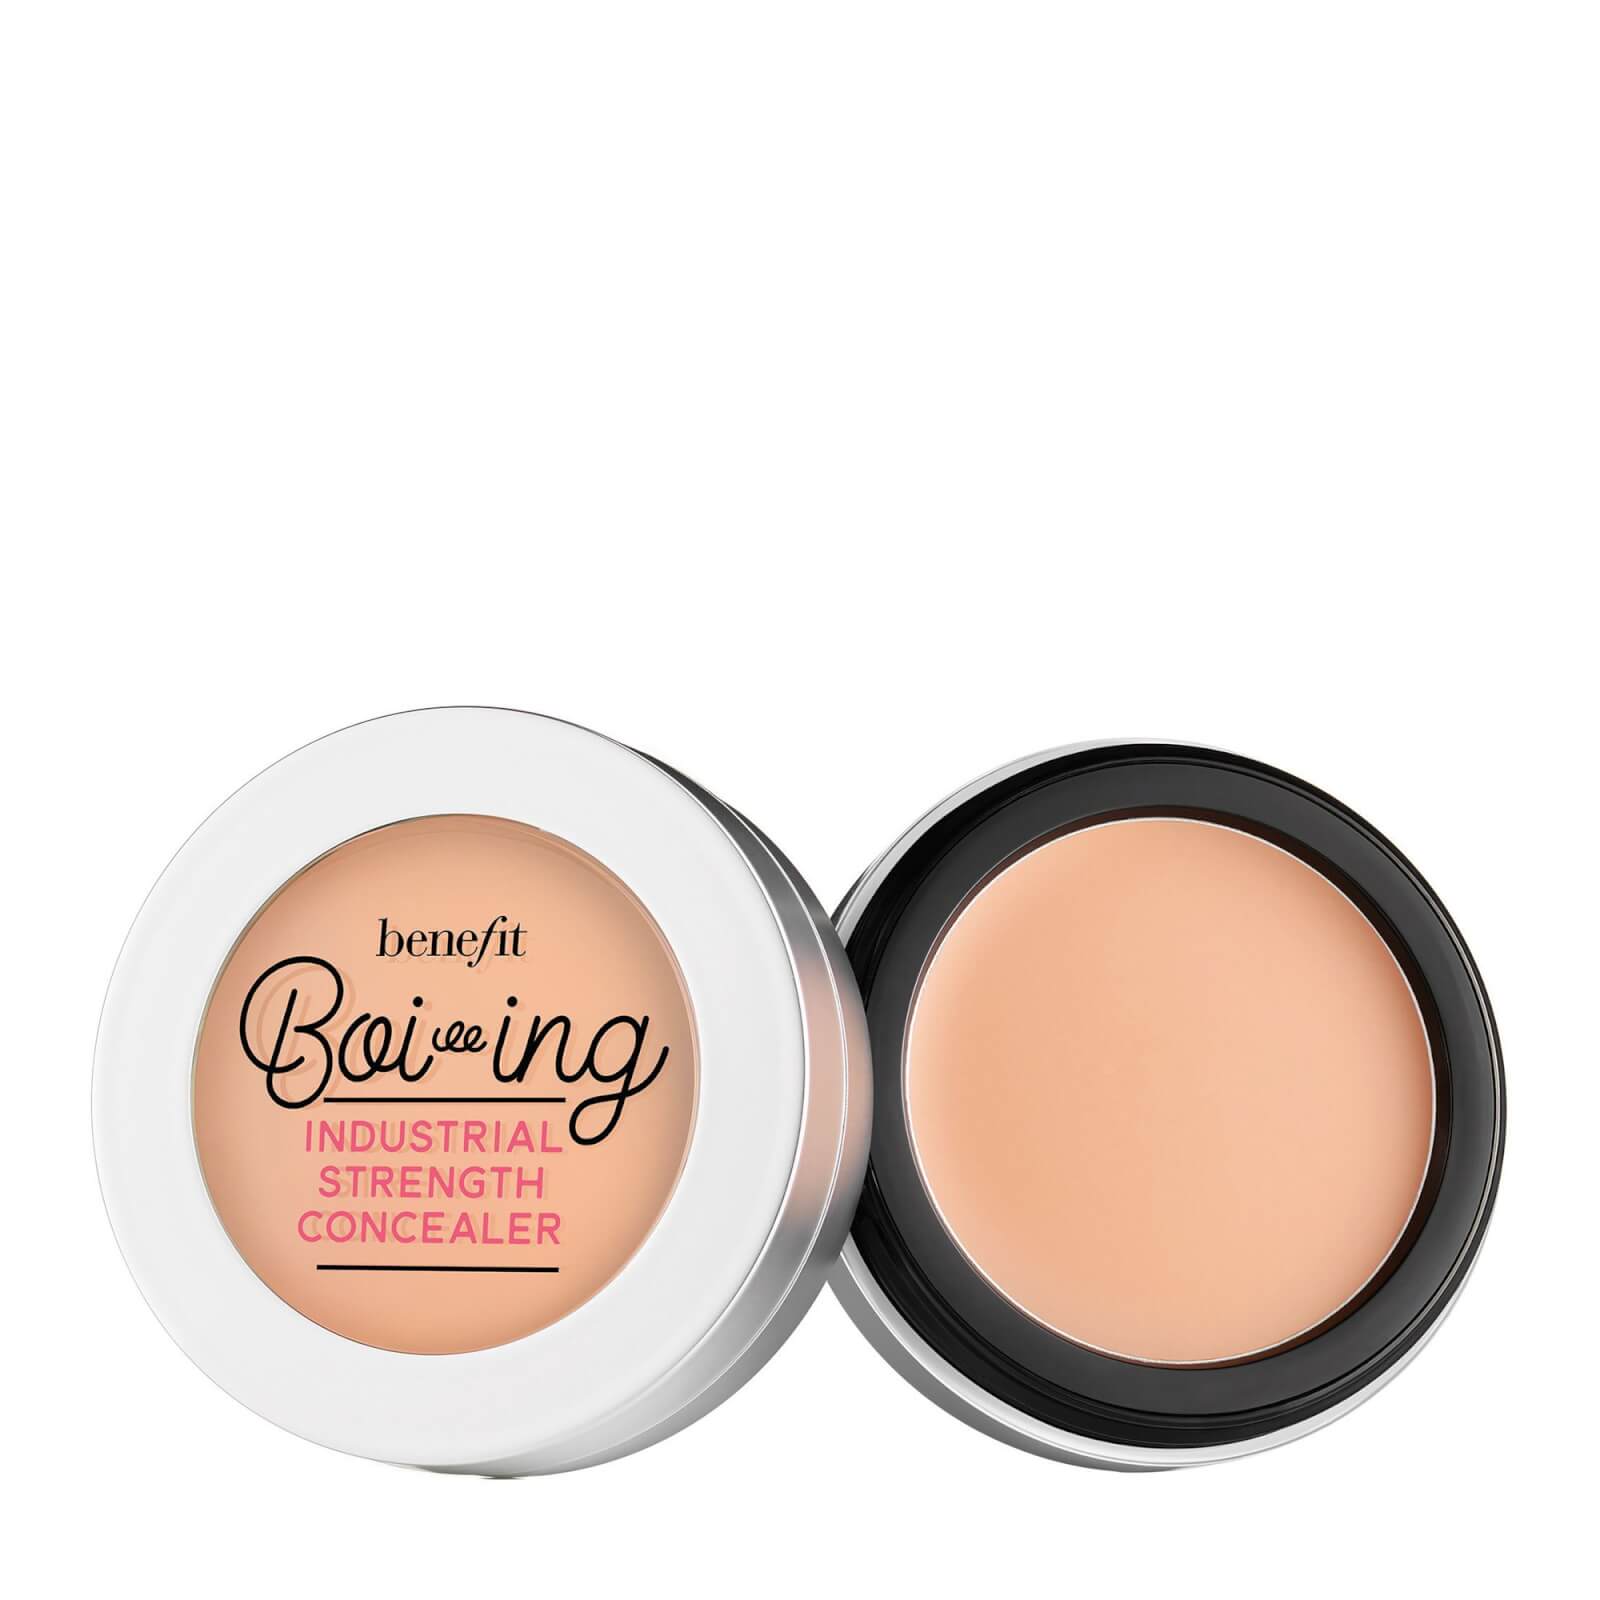 benefit Boi-ing Industrial Strength Concealer 3g (Various Shades) - 02